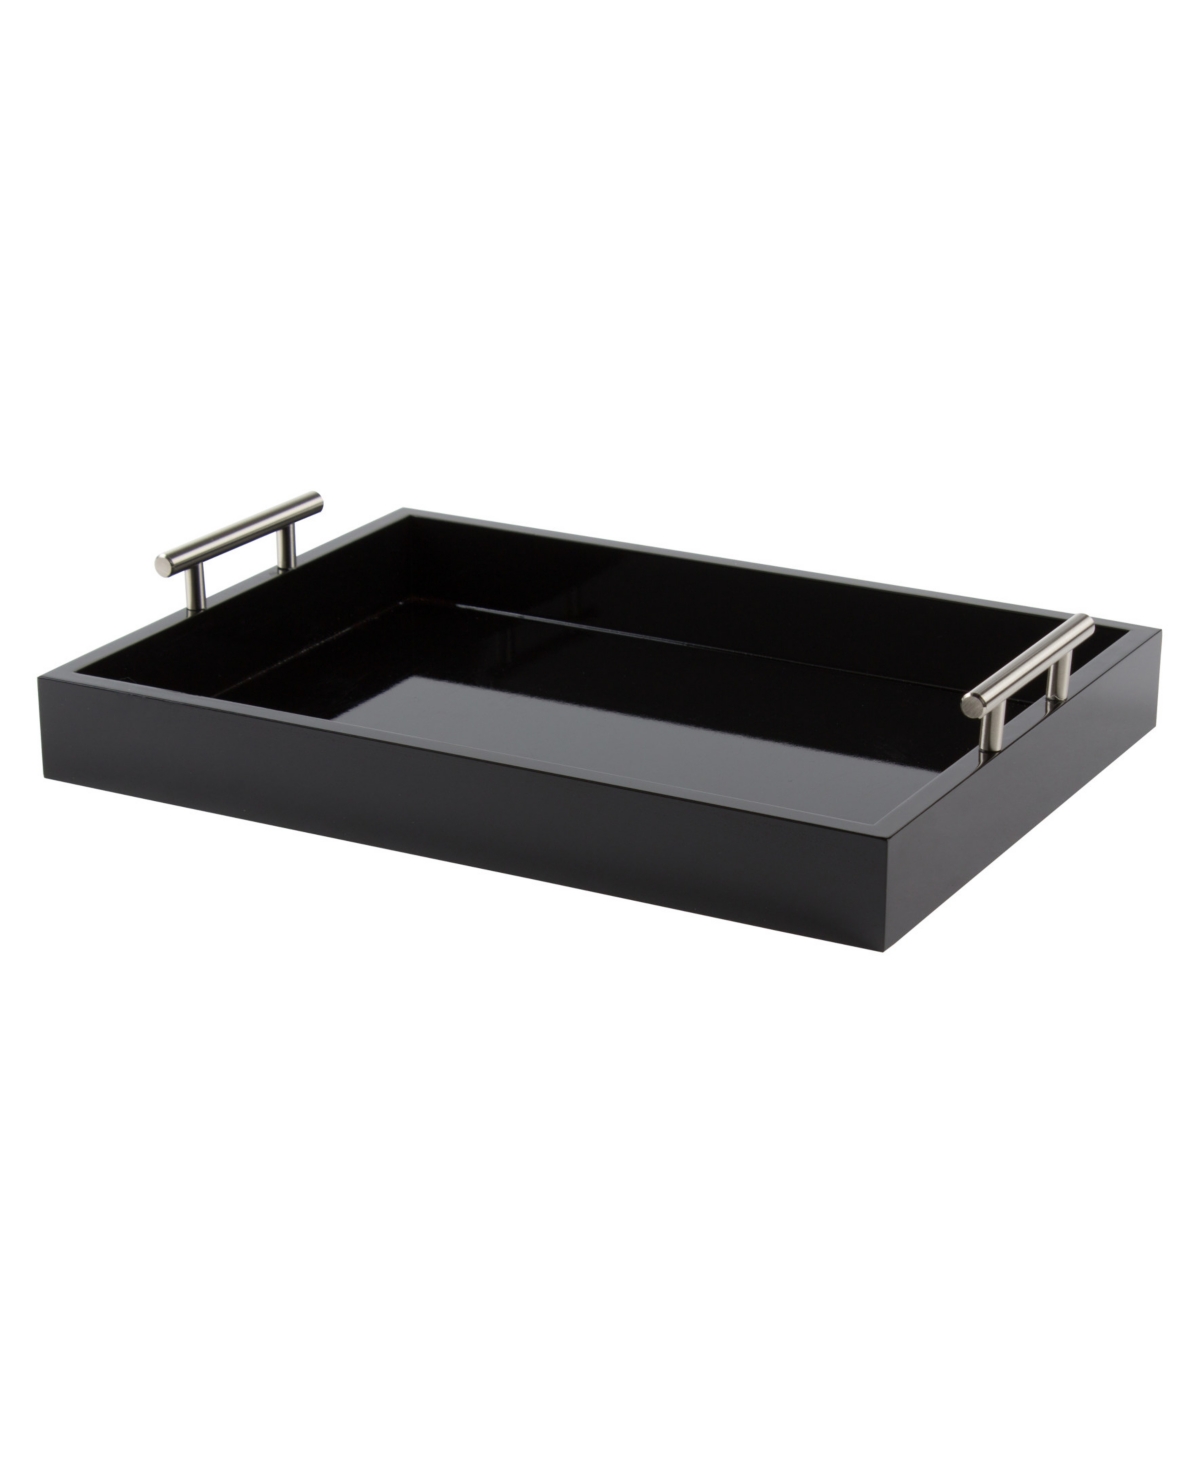 Kate And Laurel Lipton Decorative Wood Tray With Metal Handles In Black